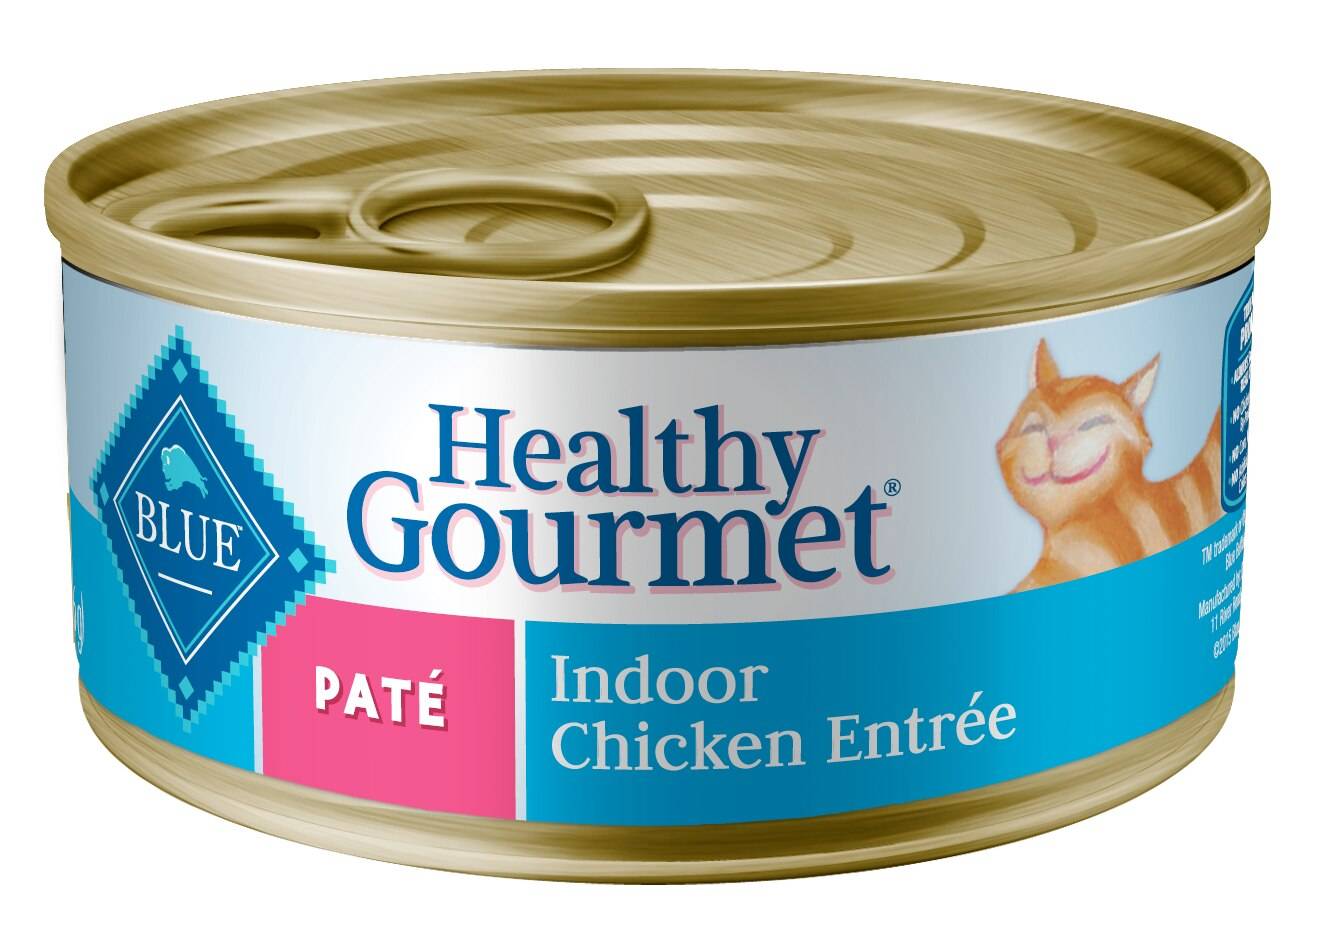 Blue Buffalo Healthy Gourmet Natural Adult Pate Wet Cat Food, Indoor Chicken Entree, 5.5 oz